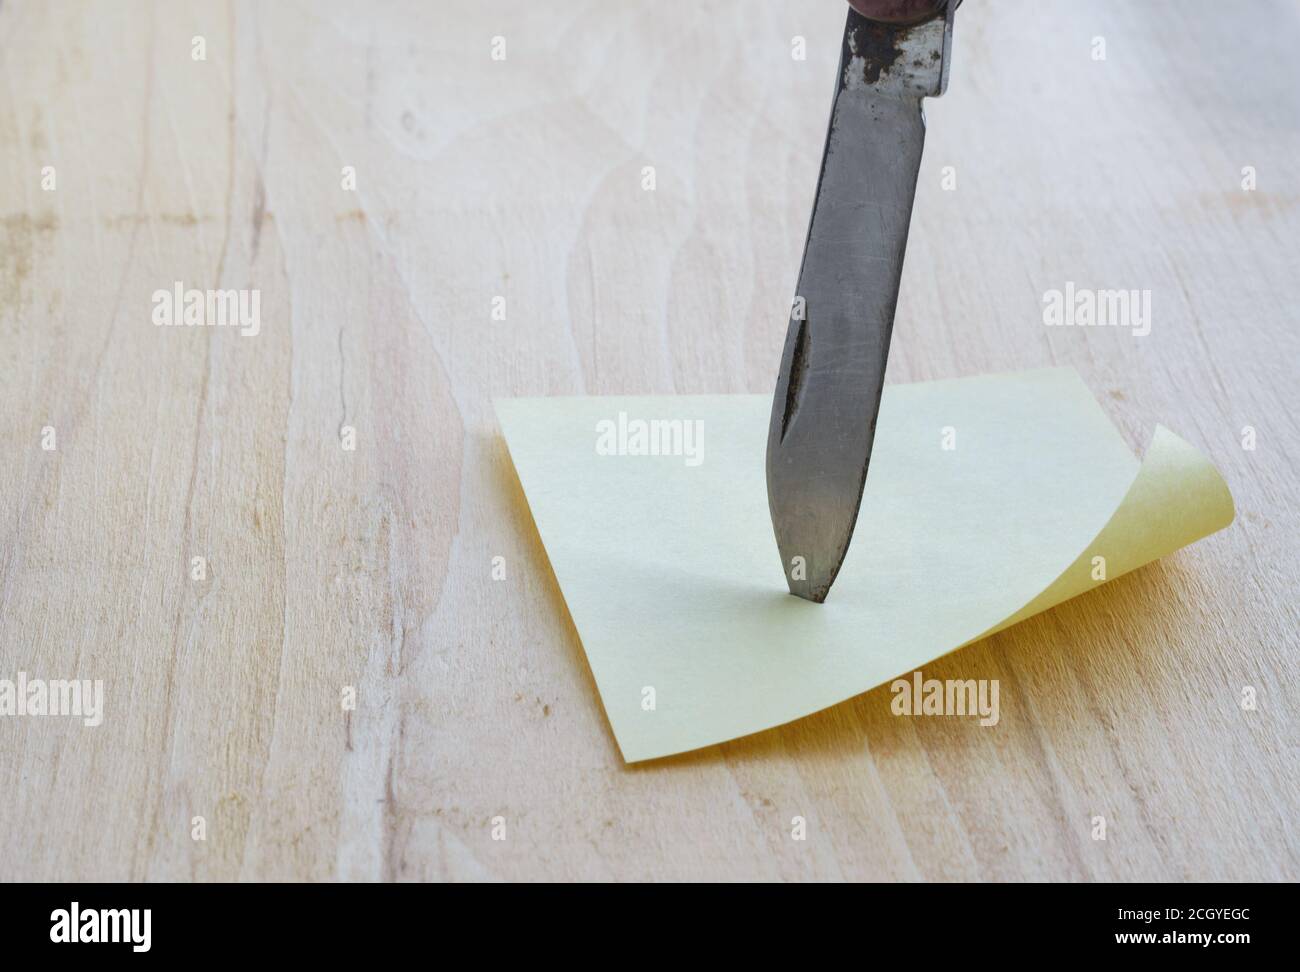 Sticker and the blade of a small knife on wooden background Stock Photo